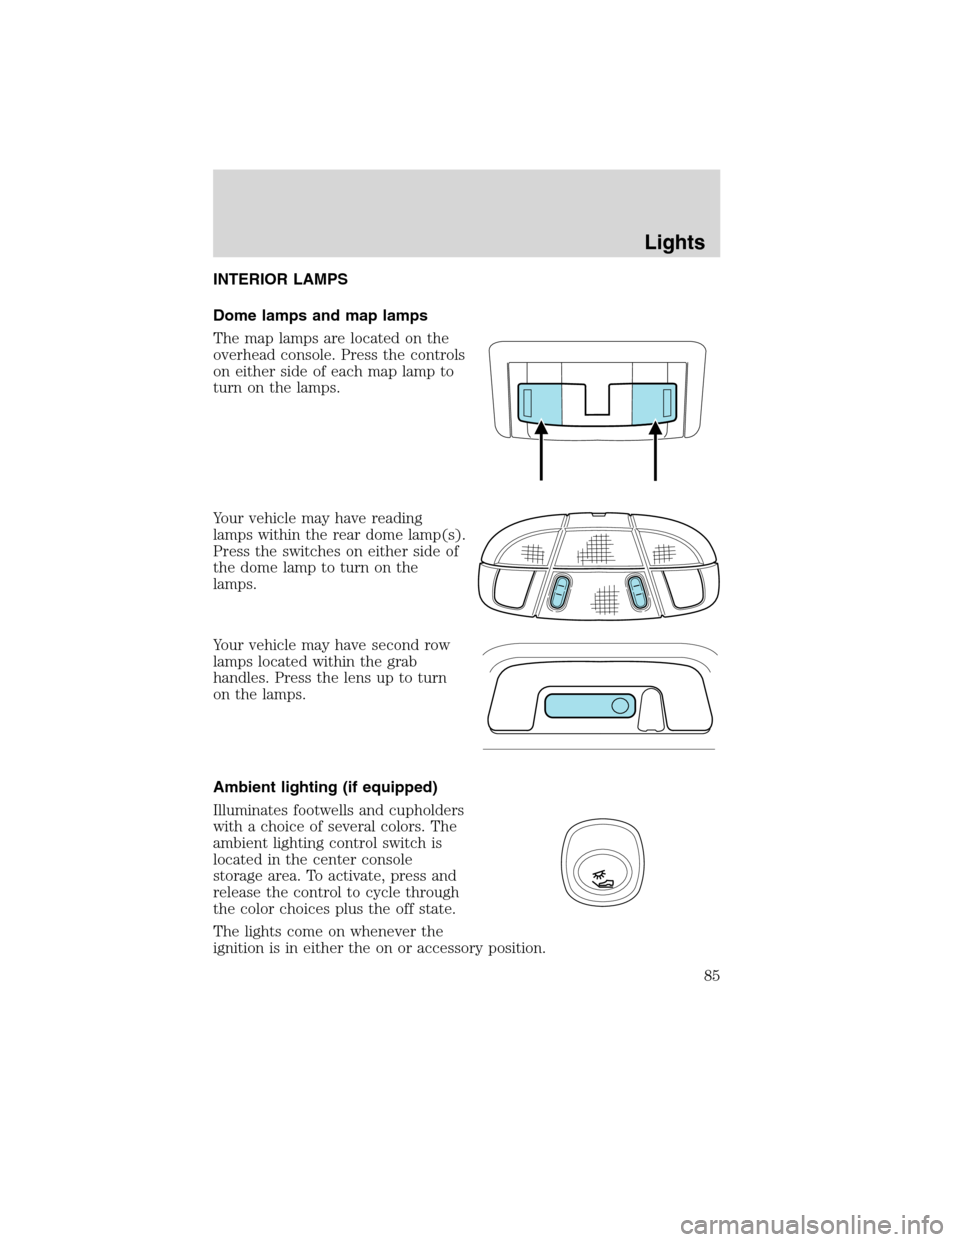 FORD FLEX 2010 1.G Owners Manual INTERIOR LAMPS
Dome lamps and map lamps
The map lamps are located on the
overhead console. Press the controls
on either side of each map lamp to
turn on the lamps.
Your vehicle may have reading
lamps 